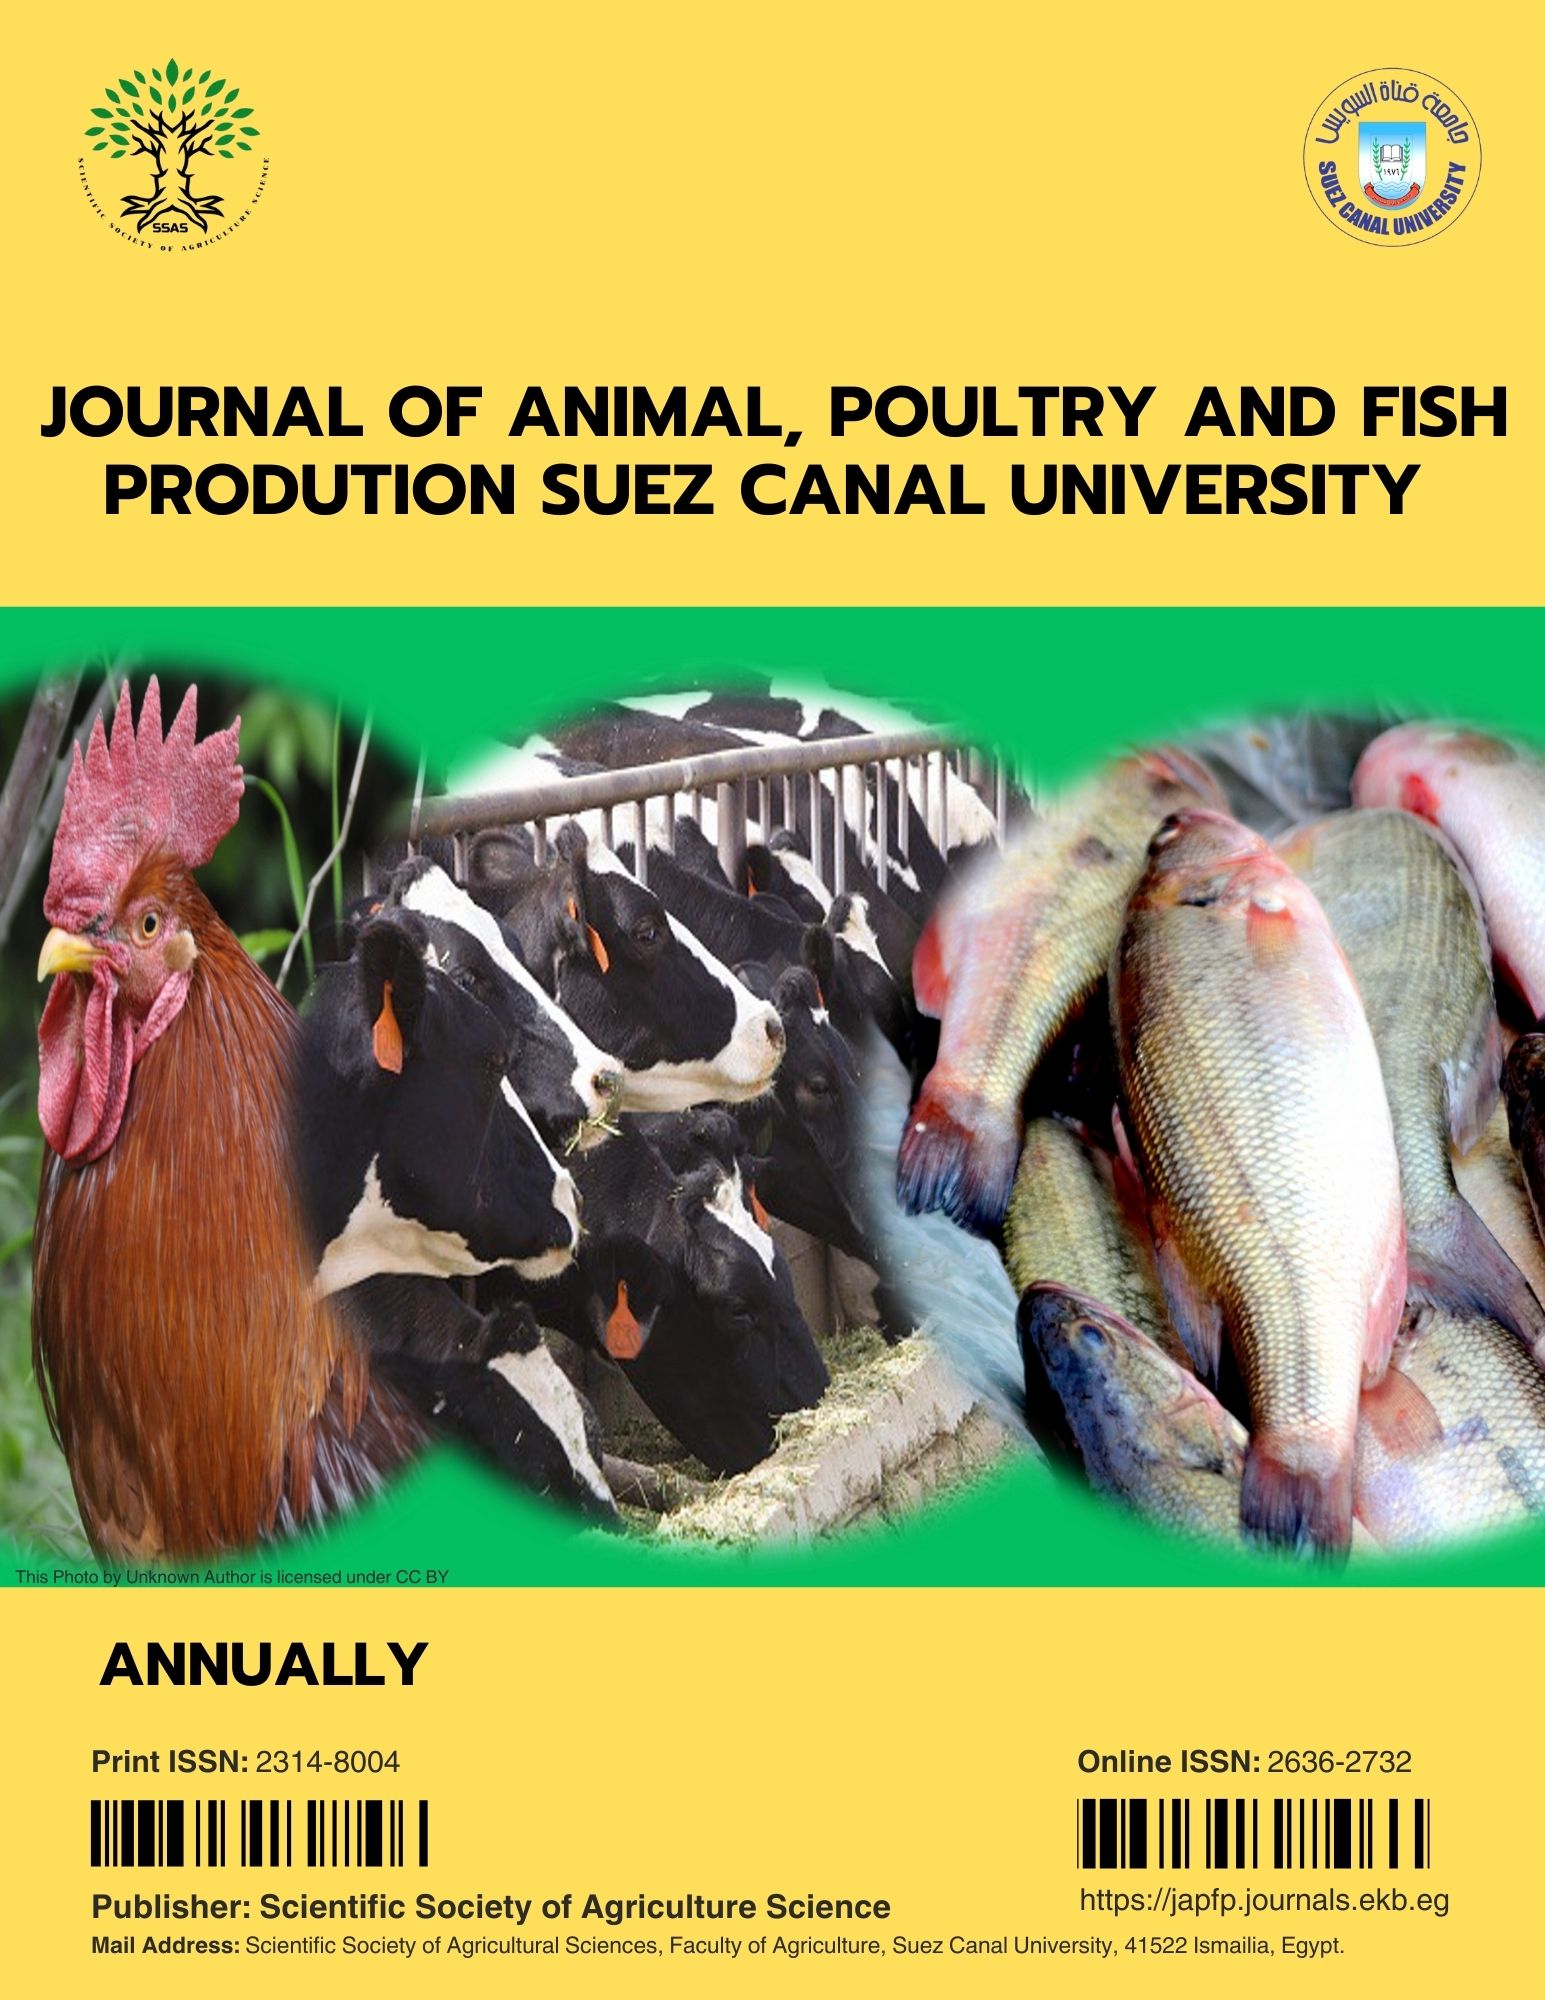 Journal of Animal, Poultry & Fish Production